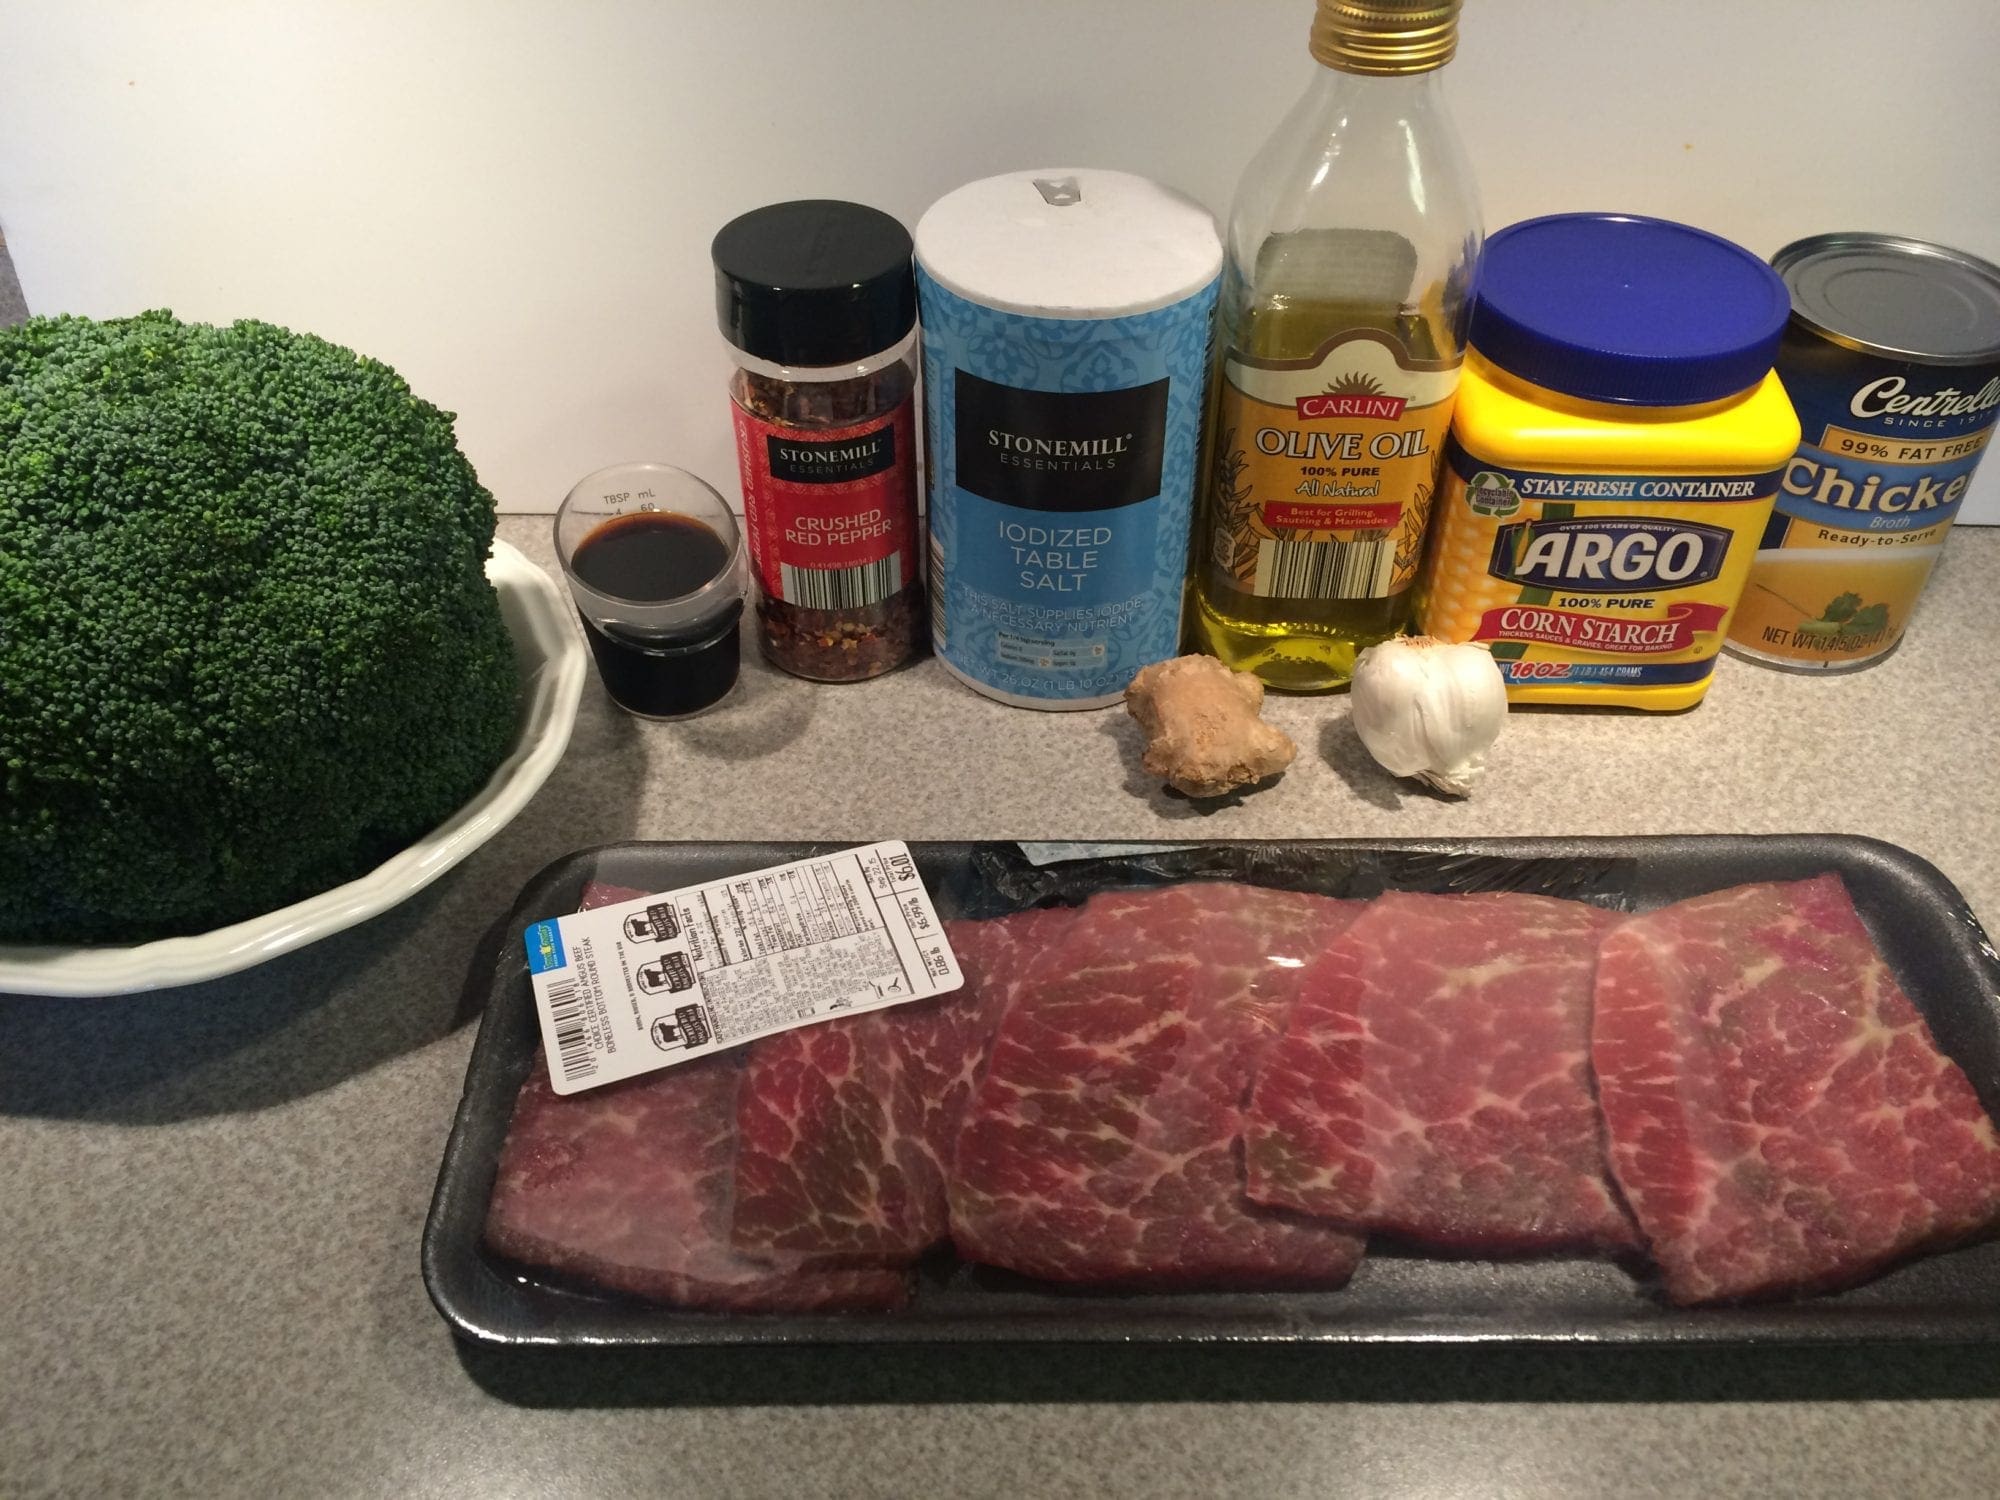 Simple ingredients for a delicious beef and broccoli stir fry recipe.